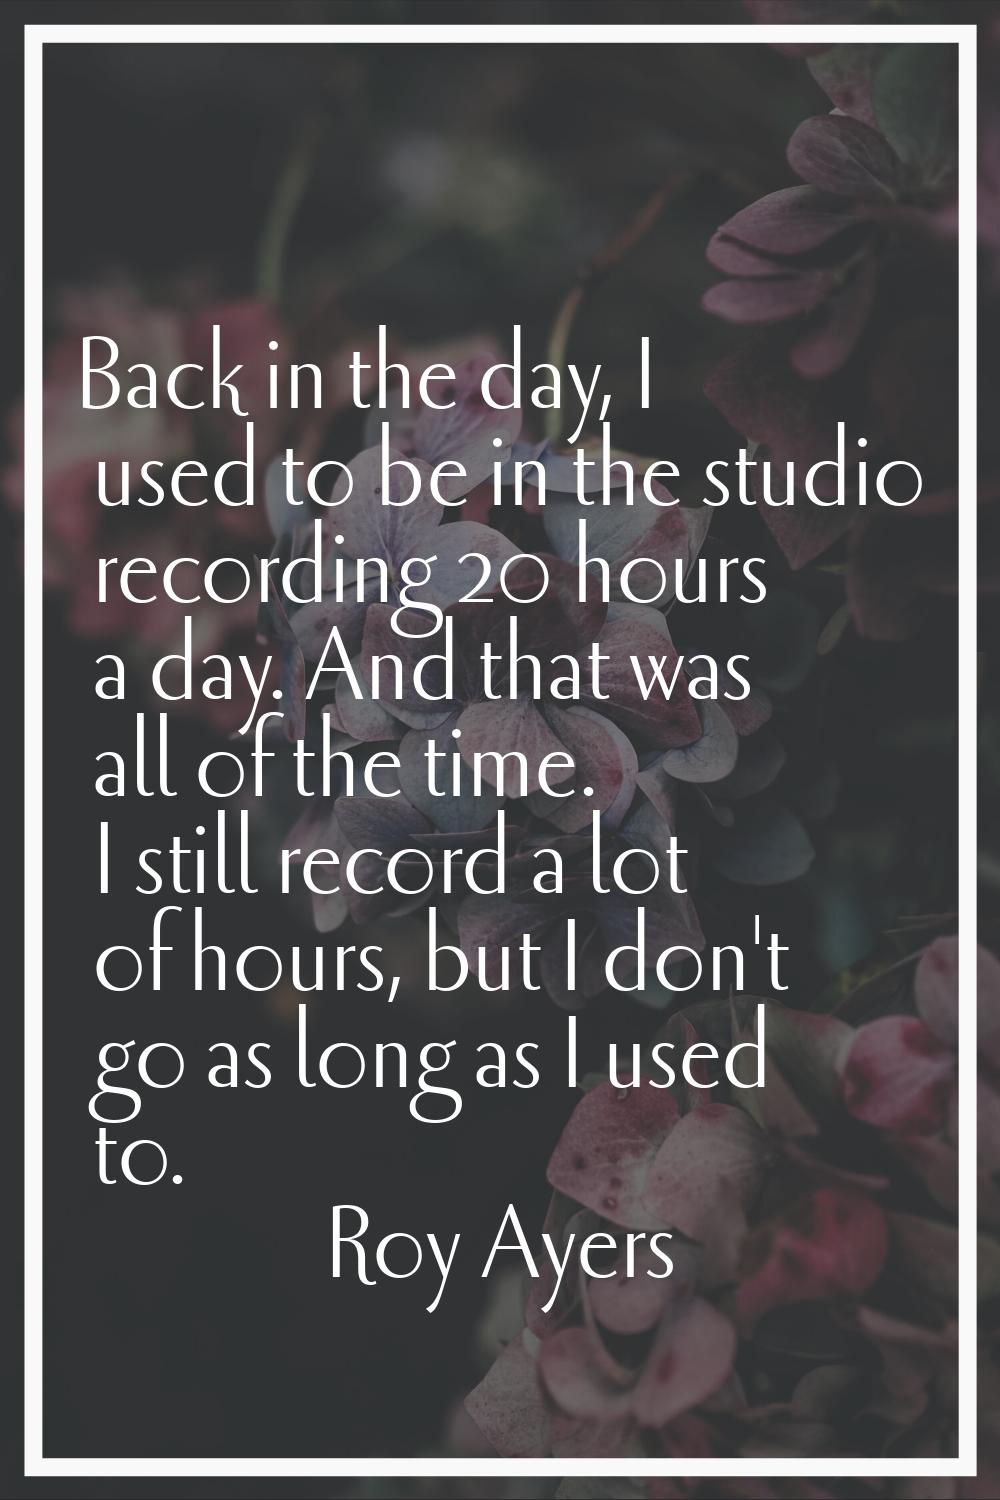 Back in the day, I used to be in the studio recording 20 hours a day. And that was all of the time.